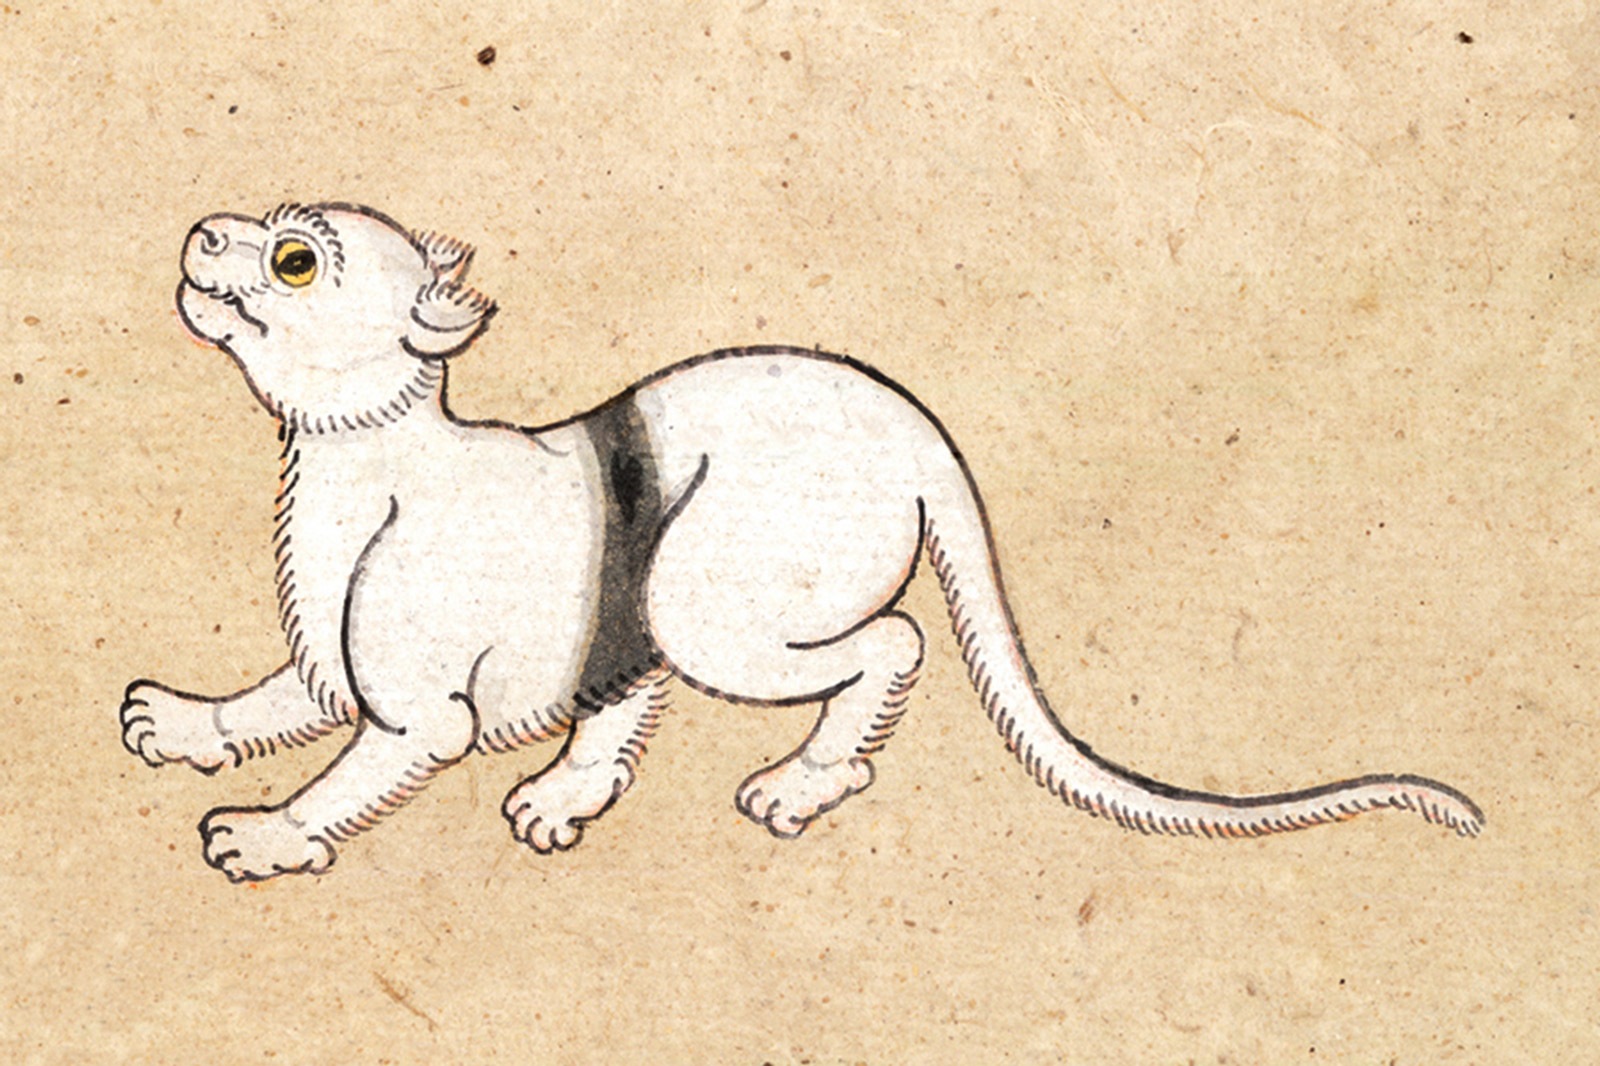 An illustration of a Ratanakamphol (Jewelled Cloth) cat from a mid-nineteenth-century manuscript titled “Tamra Maew.” The accompanying caption reads: “So called for the body colored as a conch shell,
Thus the name Jeweled Cloth was bestowed.
A dividing band from chest to back,
Golden eyes brim with water like soft light.”